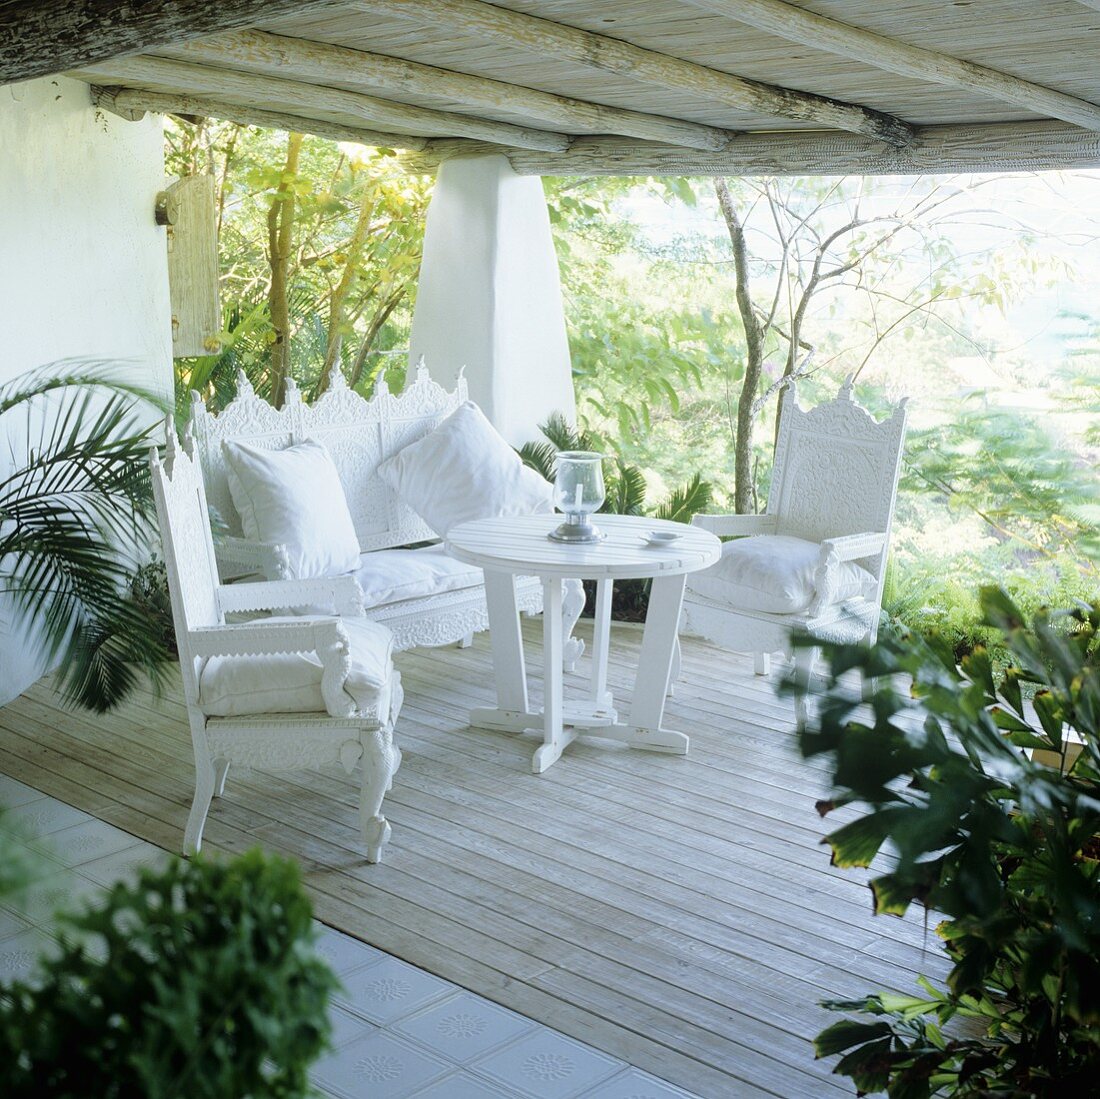 Elegant white, Spanish style terrace furniture on the wooden terrace of a holiday home